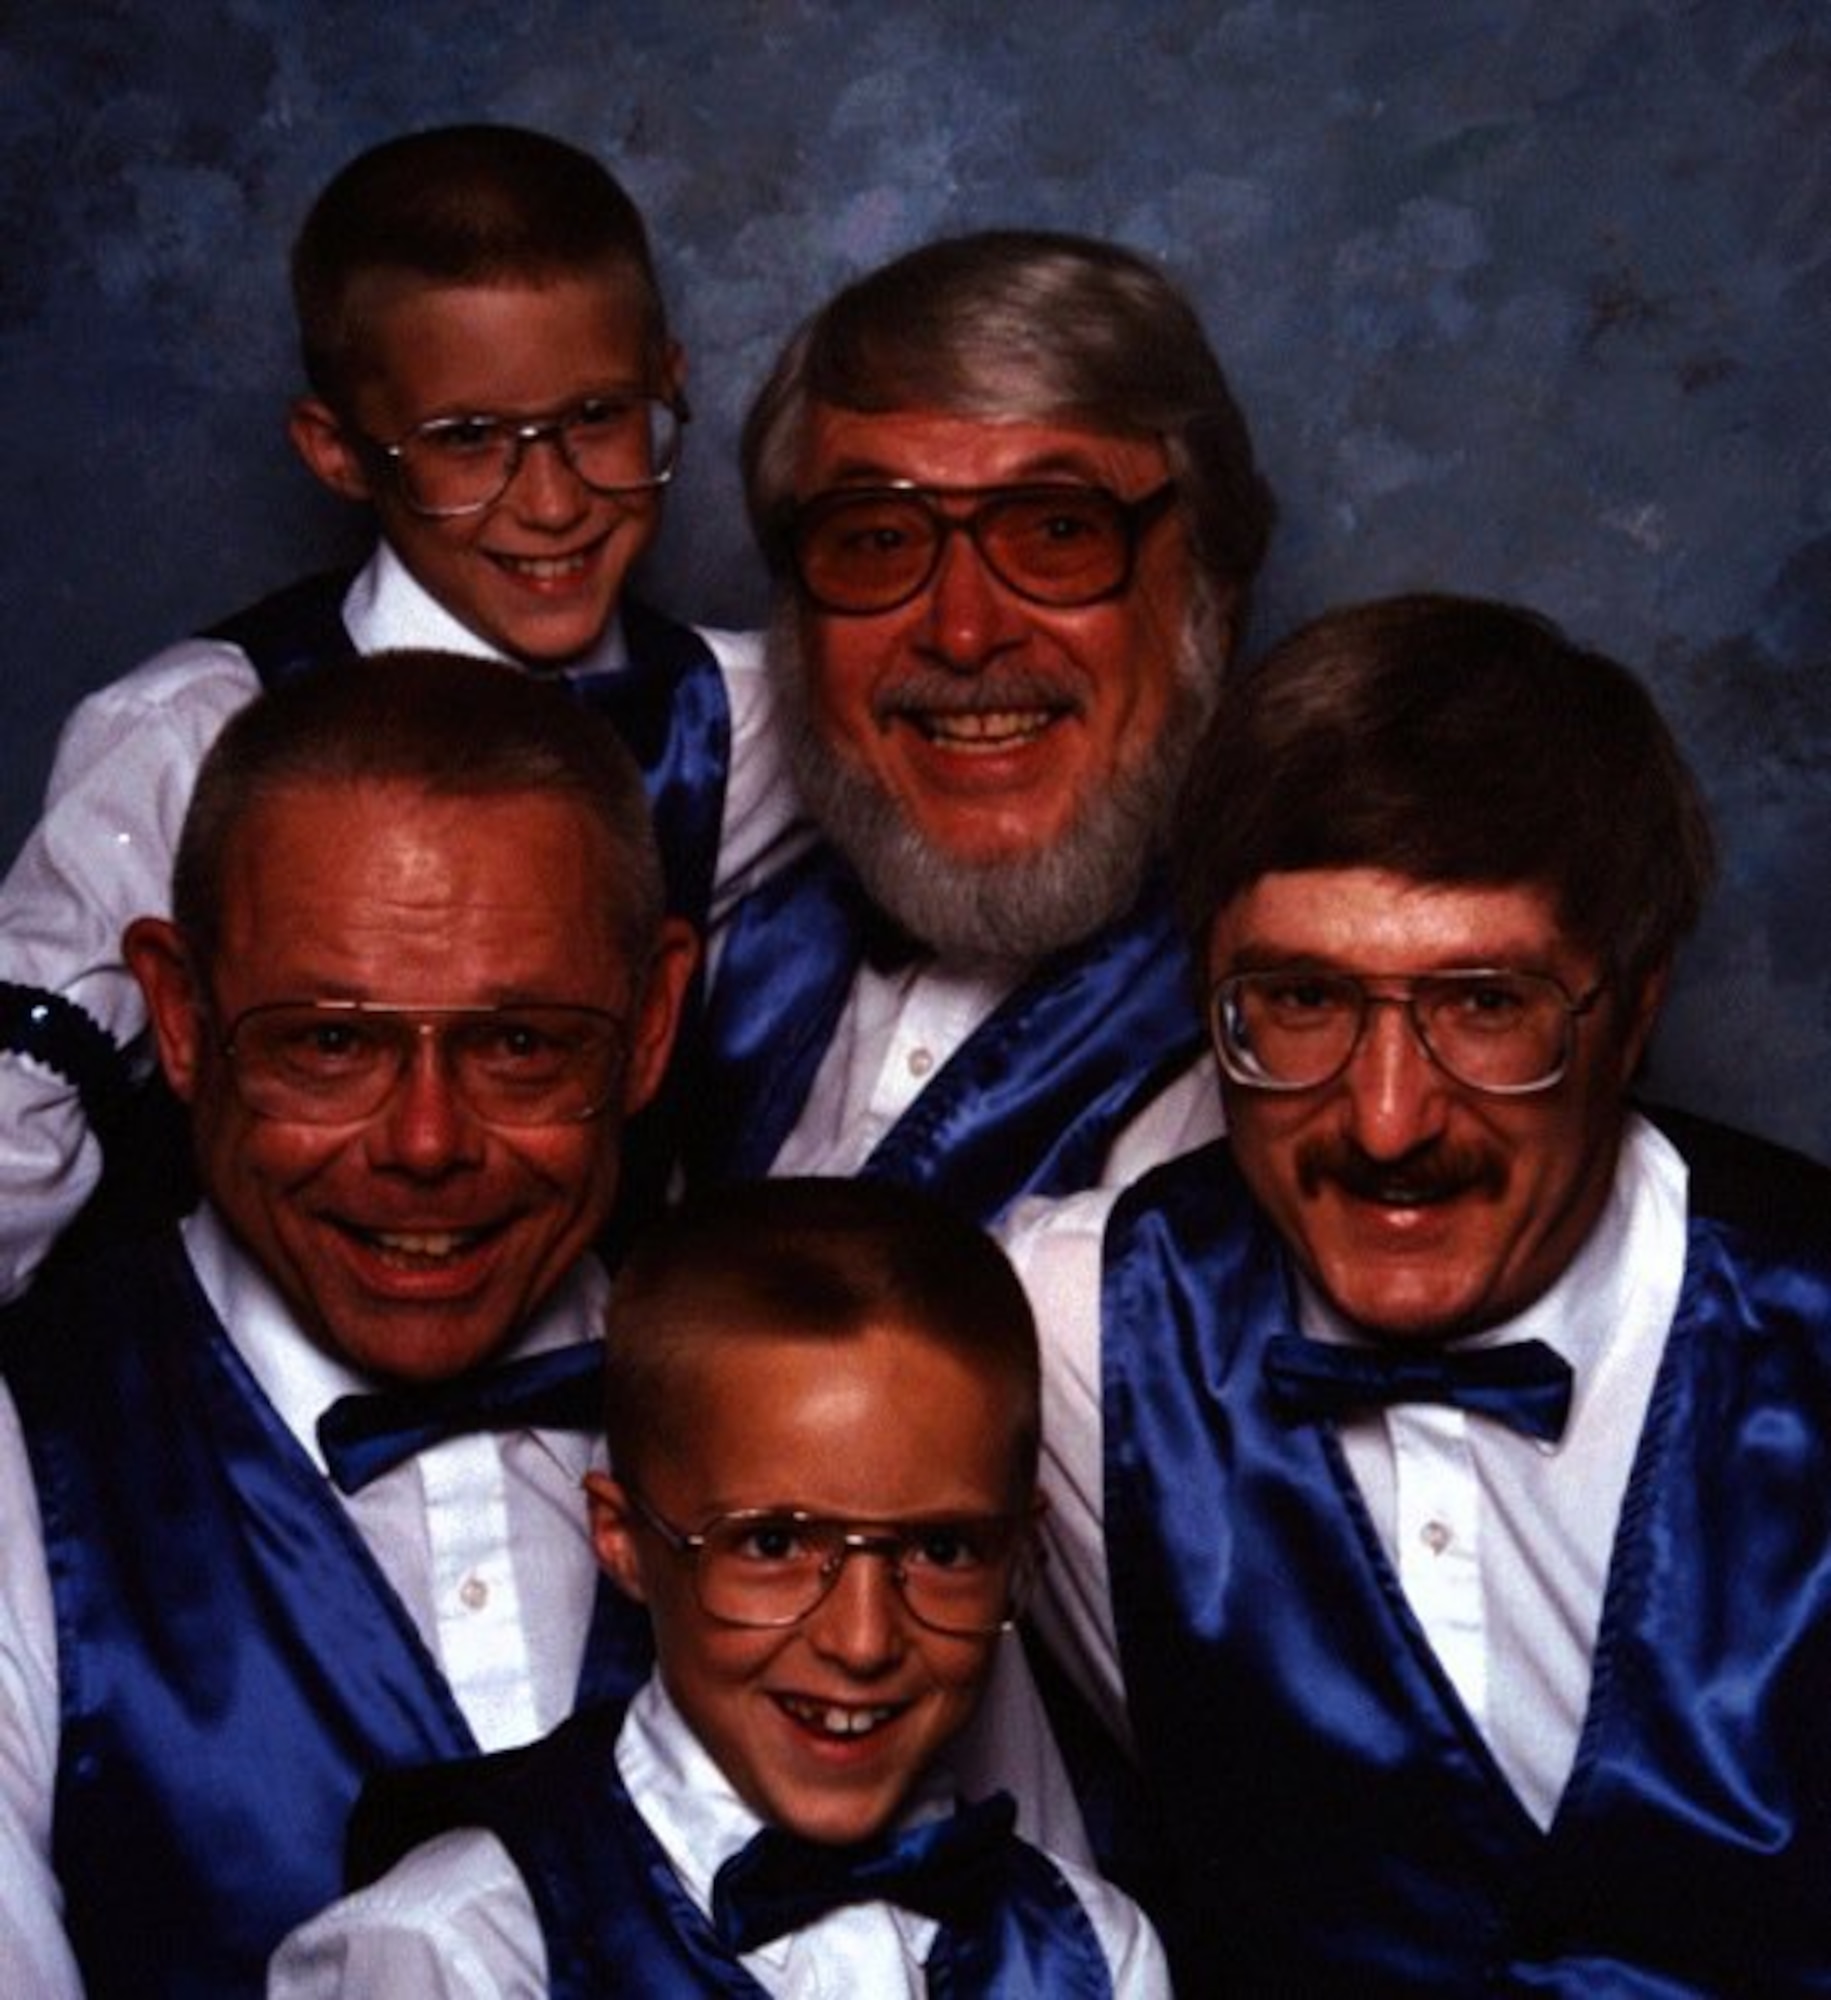 As a child, Steven Martin (top left) sang with his father's quartet. Now a Staff Sgt. working in Air Mobility Command, Martin sings with a local area quartet called "Sounds of Harmony". (Courtesy photo)